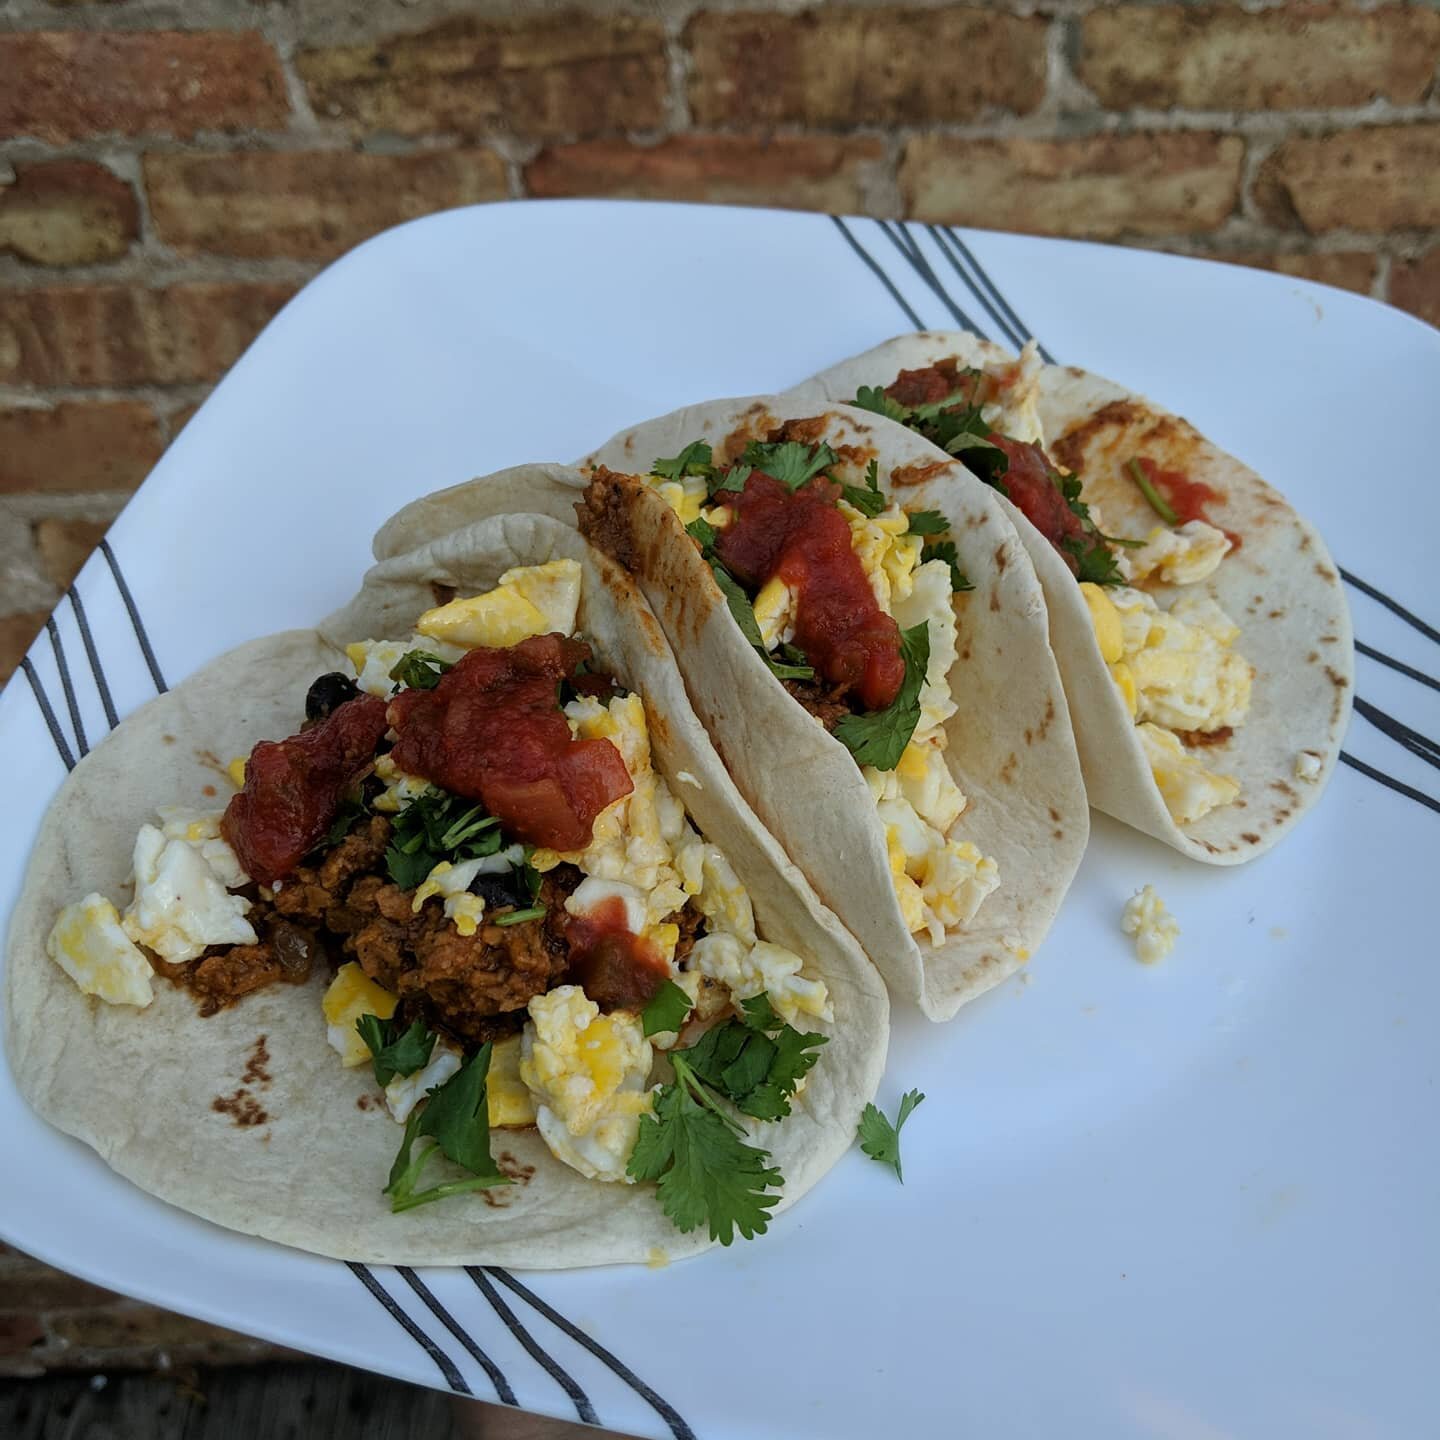 After a long day of riding my bike, it's so tempting to just want to eat junk food or order carry out! But I found myself feeling so much better if I make simple, easy meals.

Tonight I made Soy Chorizo and Eggs tacos. Minimal prep and guilt free! An